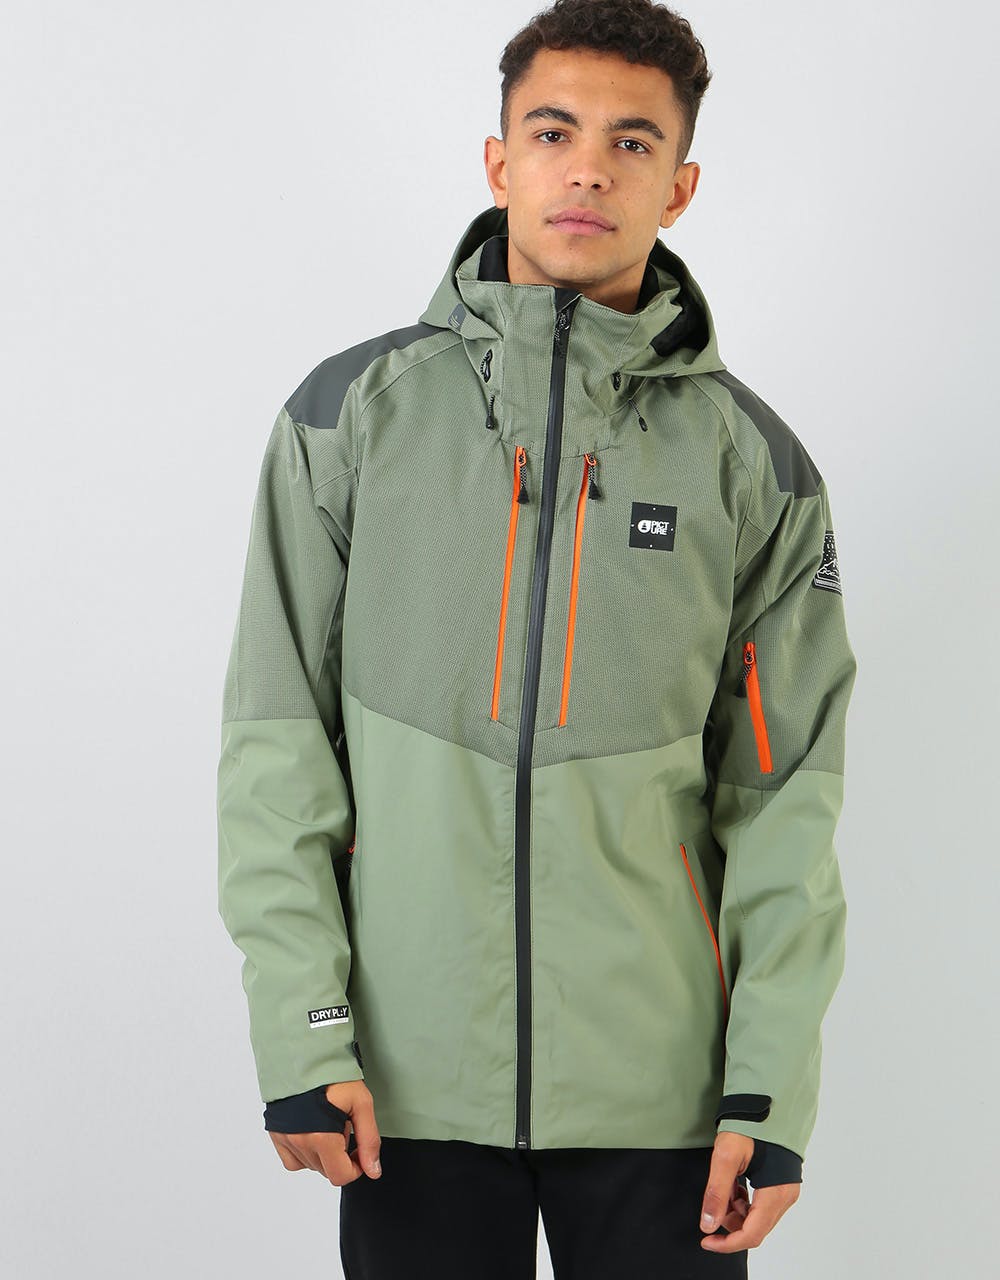 Picture Goods 2020 Snowboard Jacket - Dark Army Green – Route One